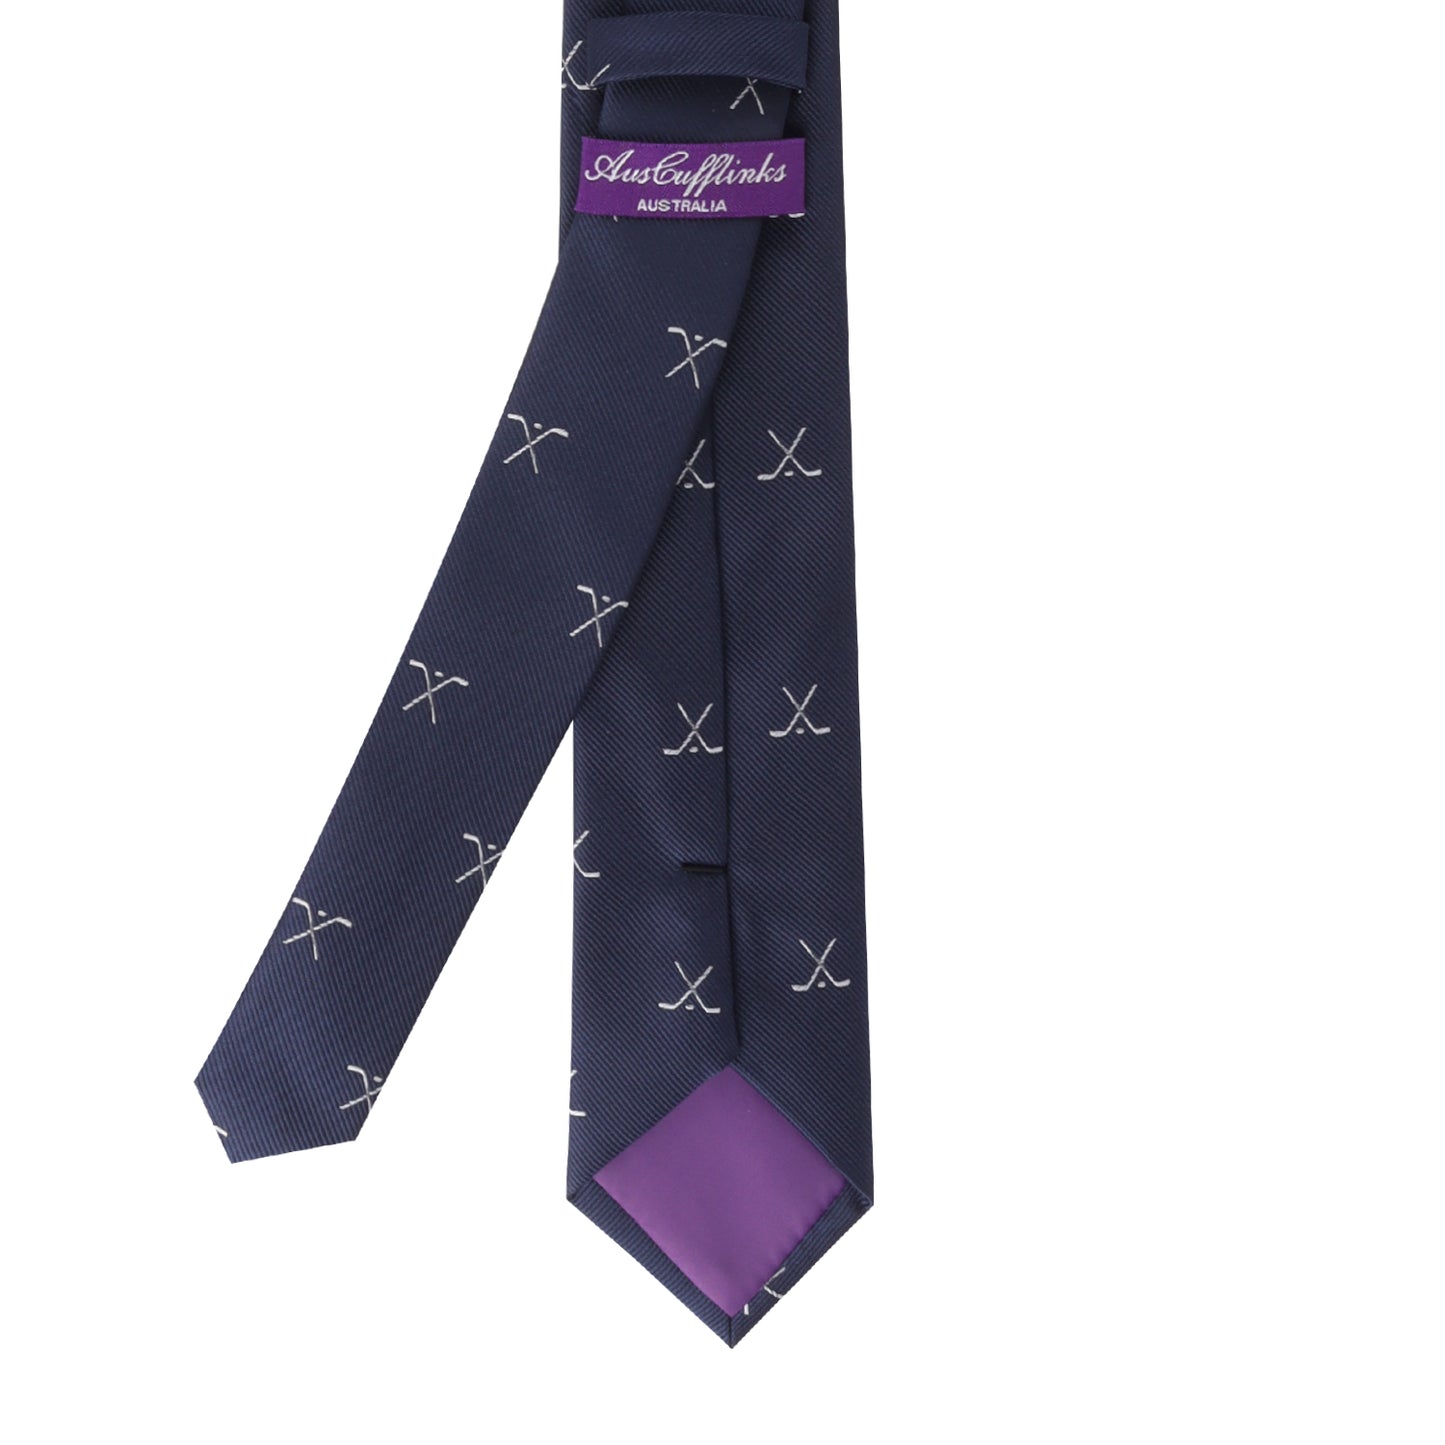 A stylish Crossed Ice Hockey Skinny Tie, earning you some serious style points.